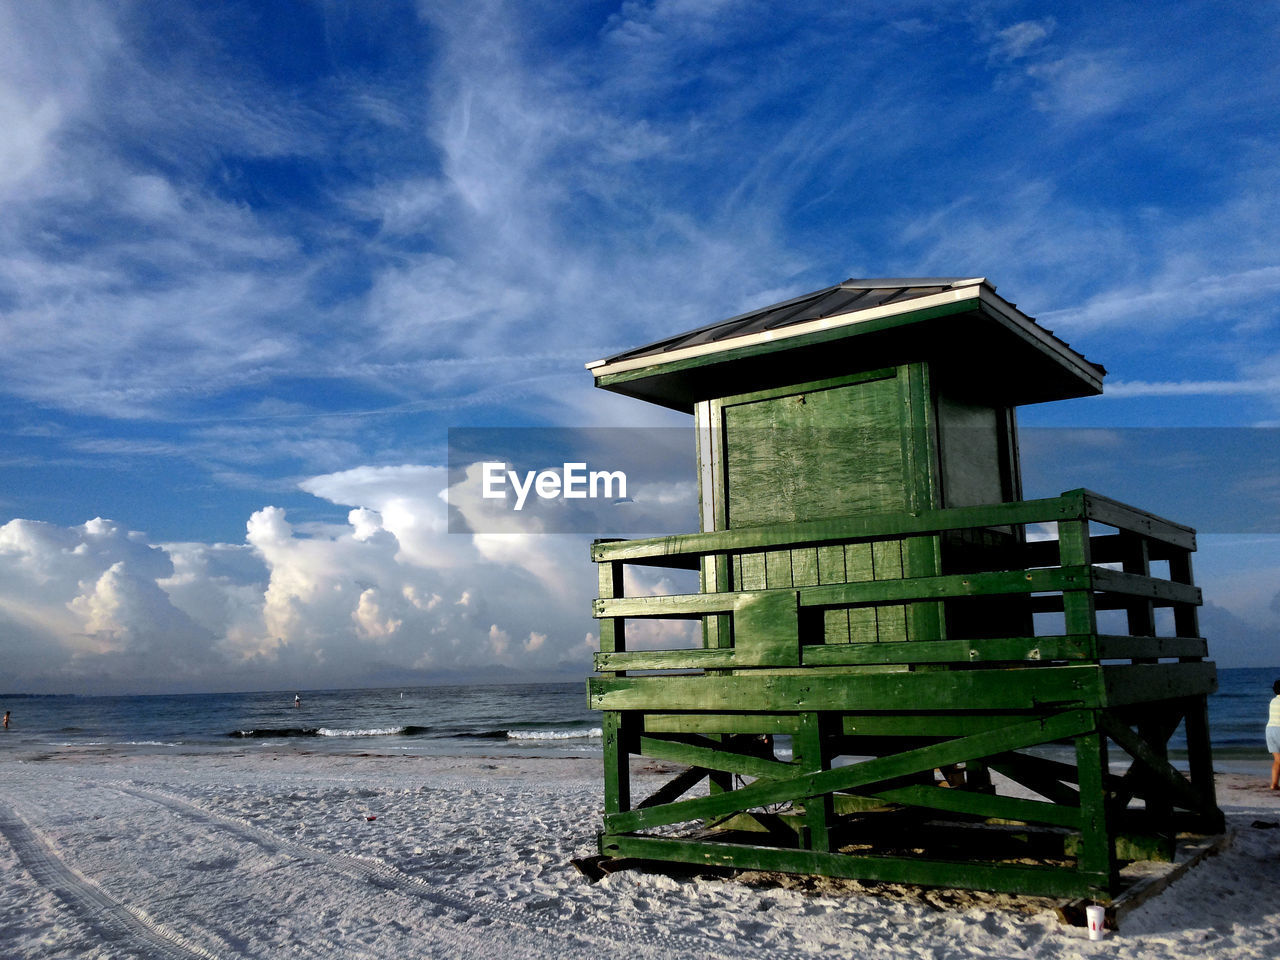 sky, cloud, beach, land, nature, water, architecture, hut, sea, built structure, scenics - nature, no people, ocean, lifeguard hut, beauty in nature, man made structure, environment, blue, landscape, tower, travel destinations, outdoors, tranquility, day, building exterior, tranquil scene, coast, sand, wood, security, protection, building, travel, shore, snow